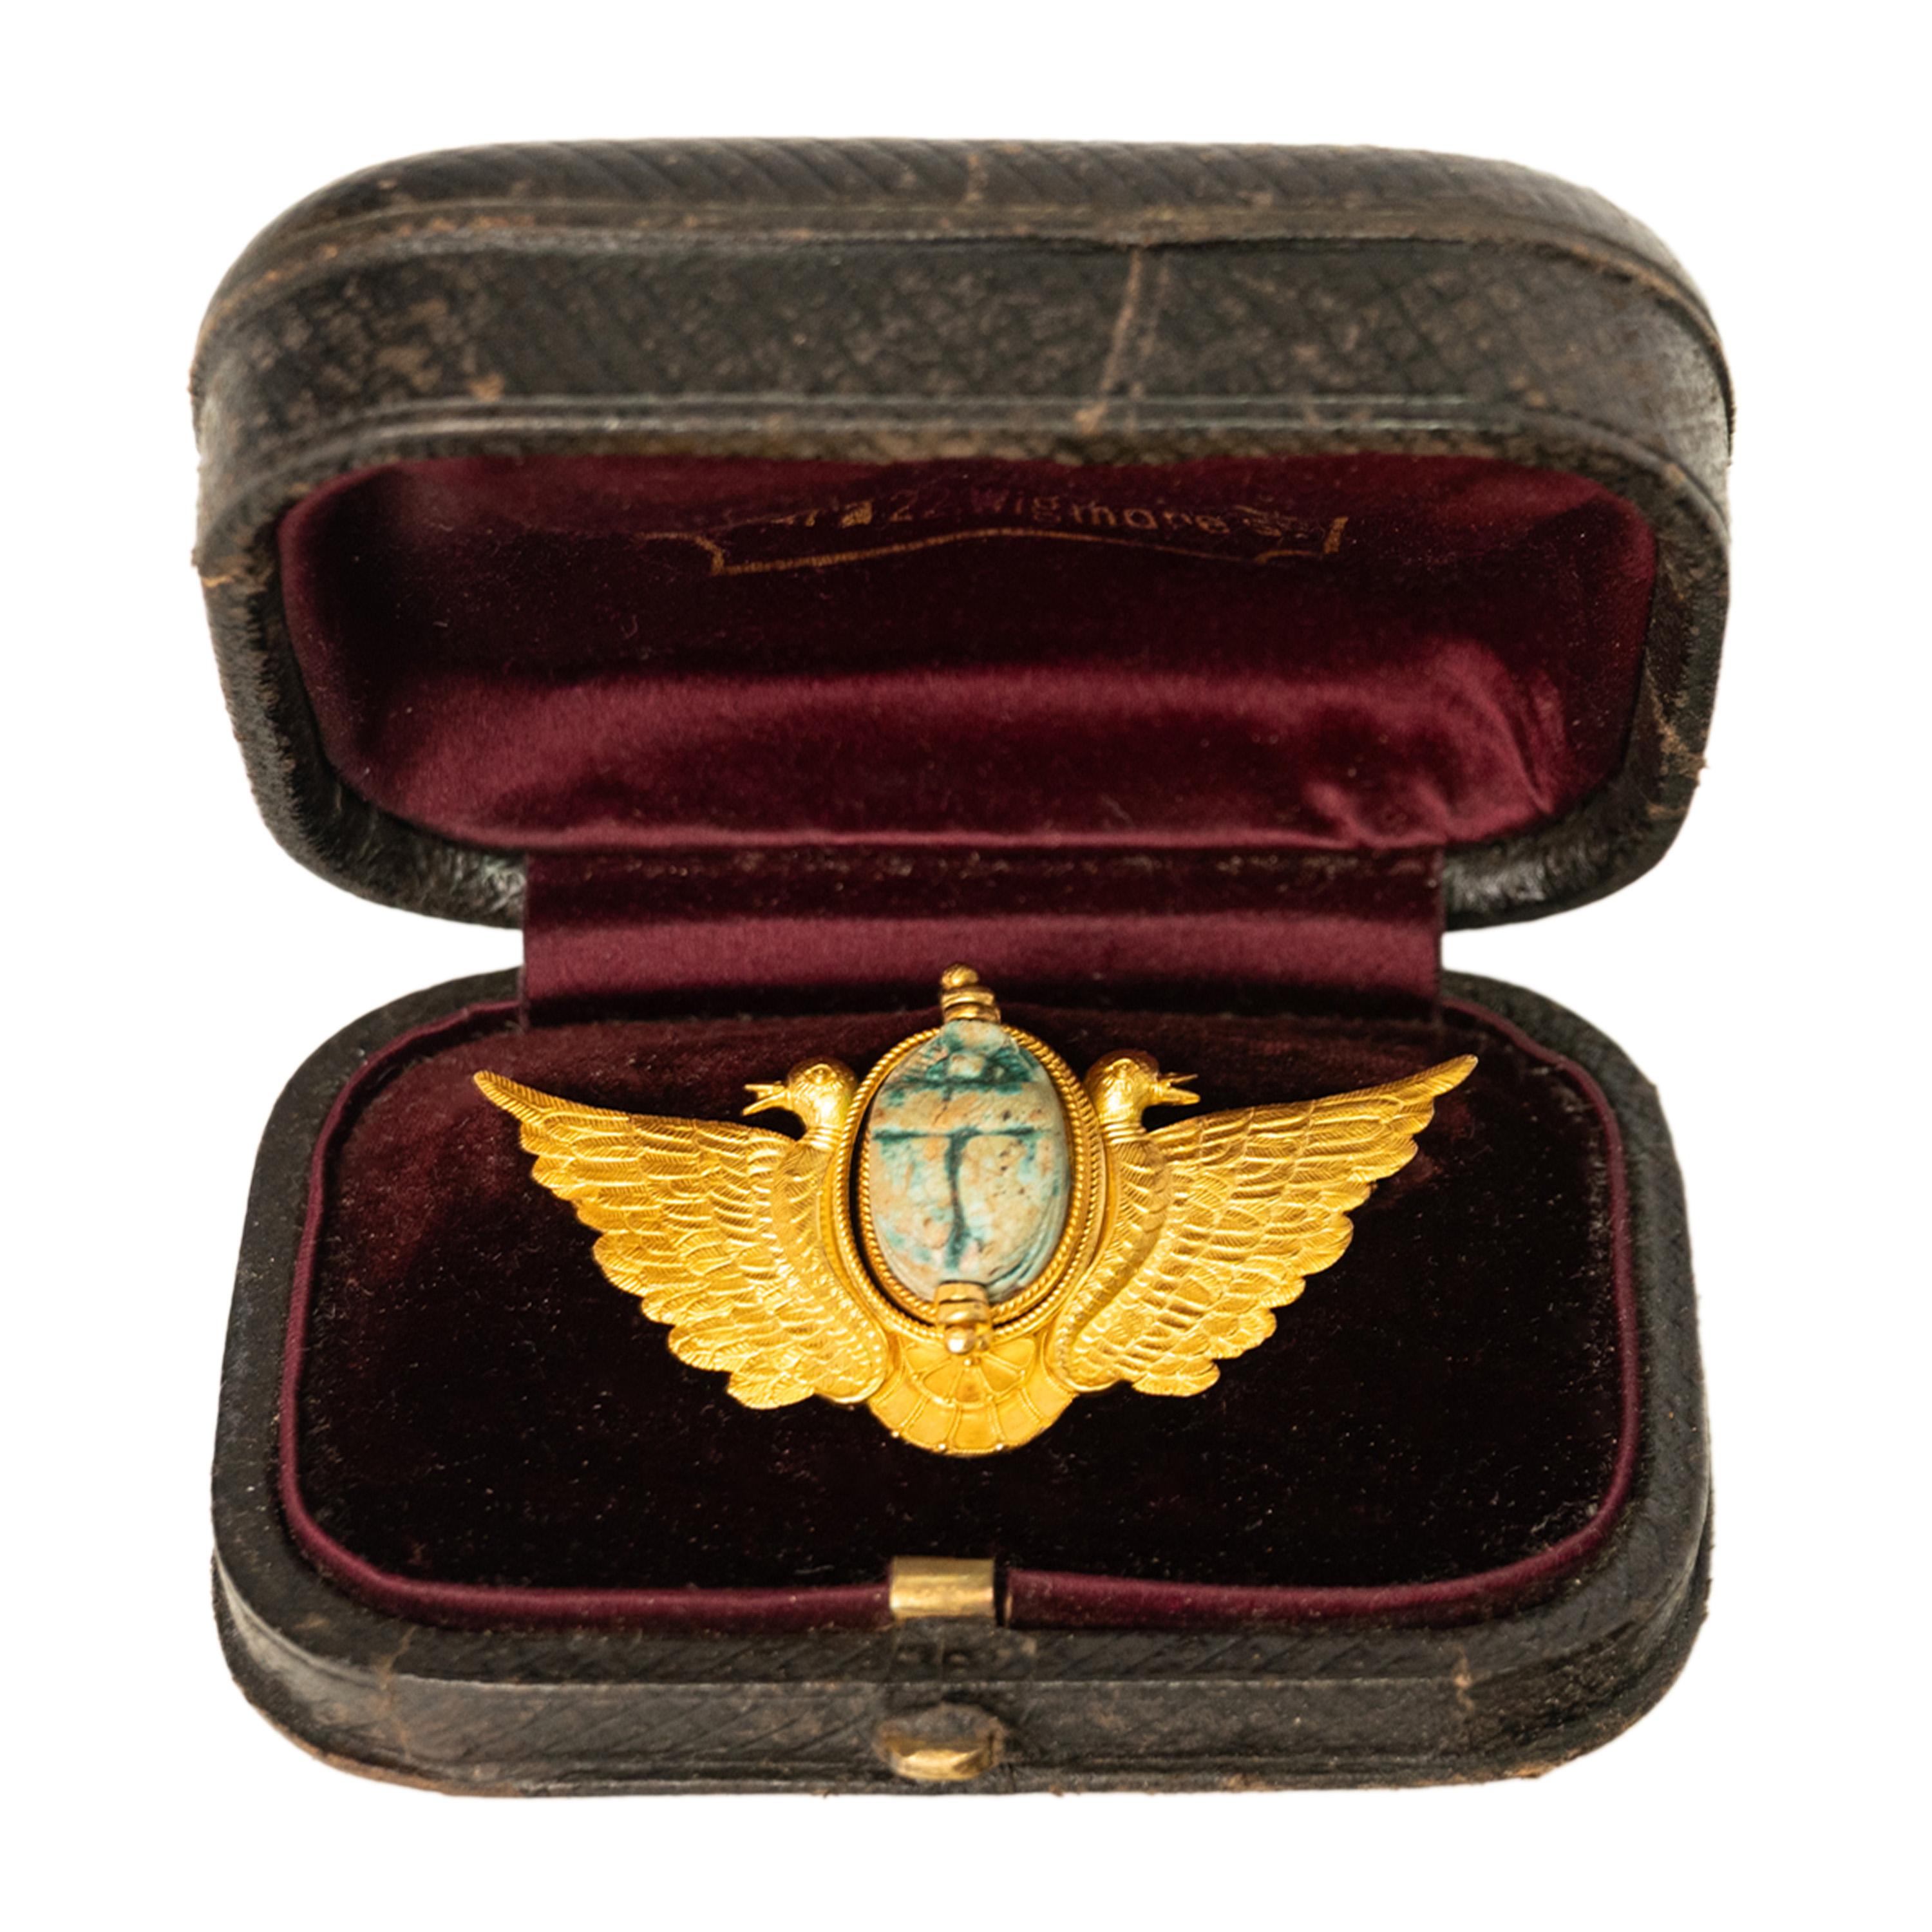 A wonderful antique 24 karat gold Egyptian Revival brooch set with an ancient 1500 B.C.E Egyptian faience pottery scarab, by the famous 19th century Italian jeweler Cesare Tombini, circa 1870.
A beautiful 24 Karat gold brooch decorated with twin